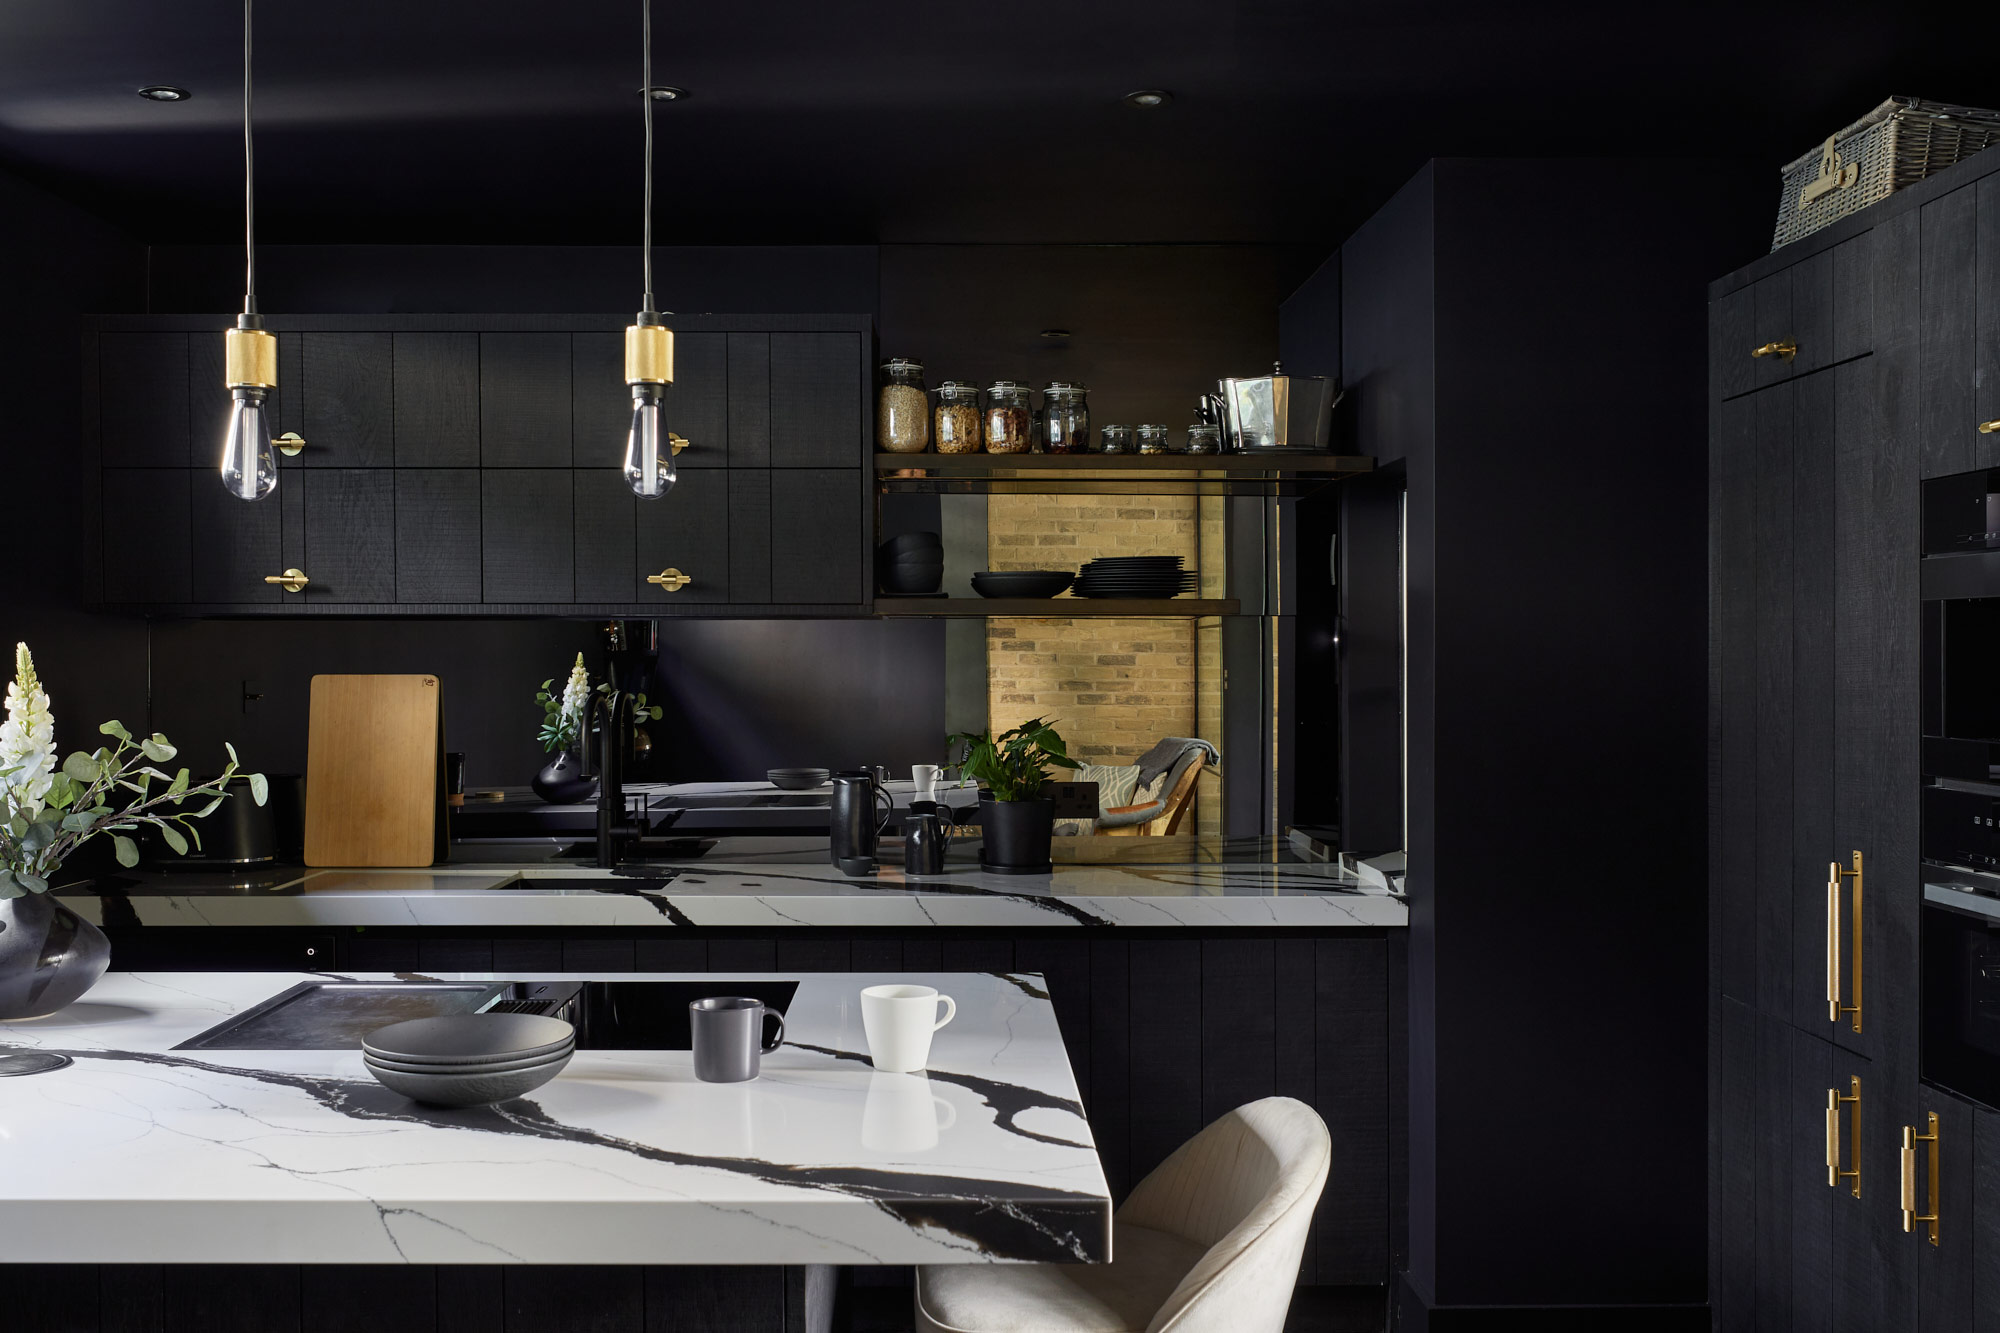 Black industrial kitchen by The Main Company